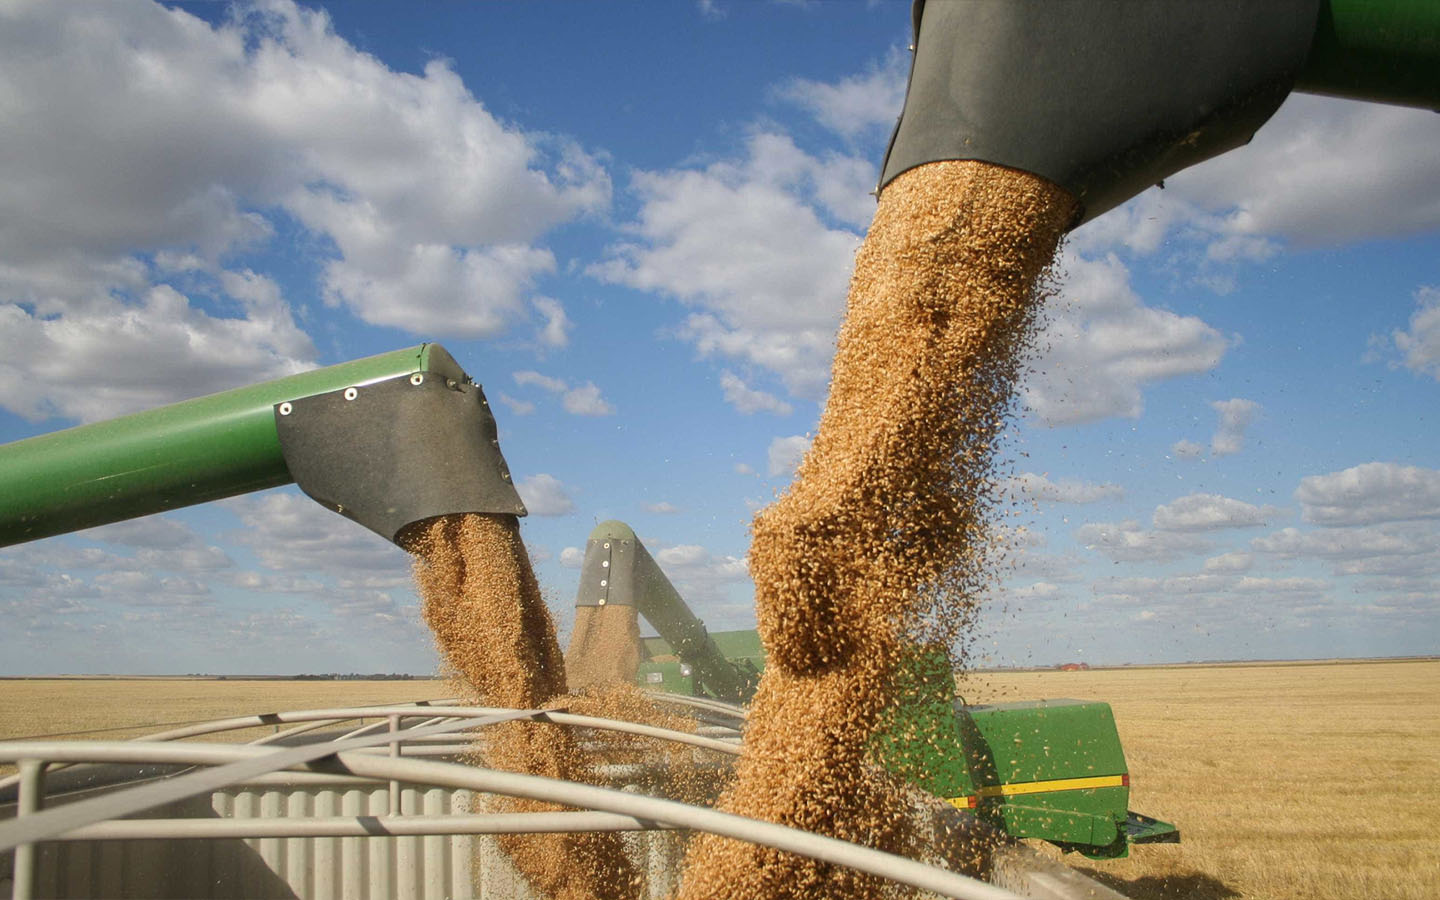 Brazil becomes the world’s biggest exporter of several food commodities